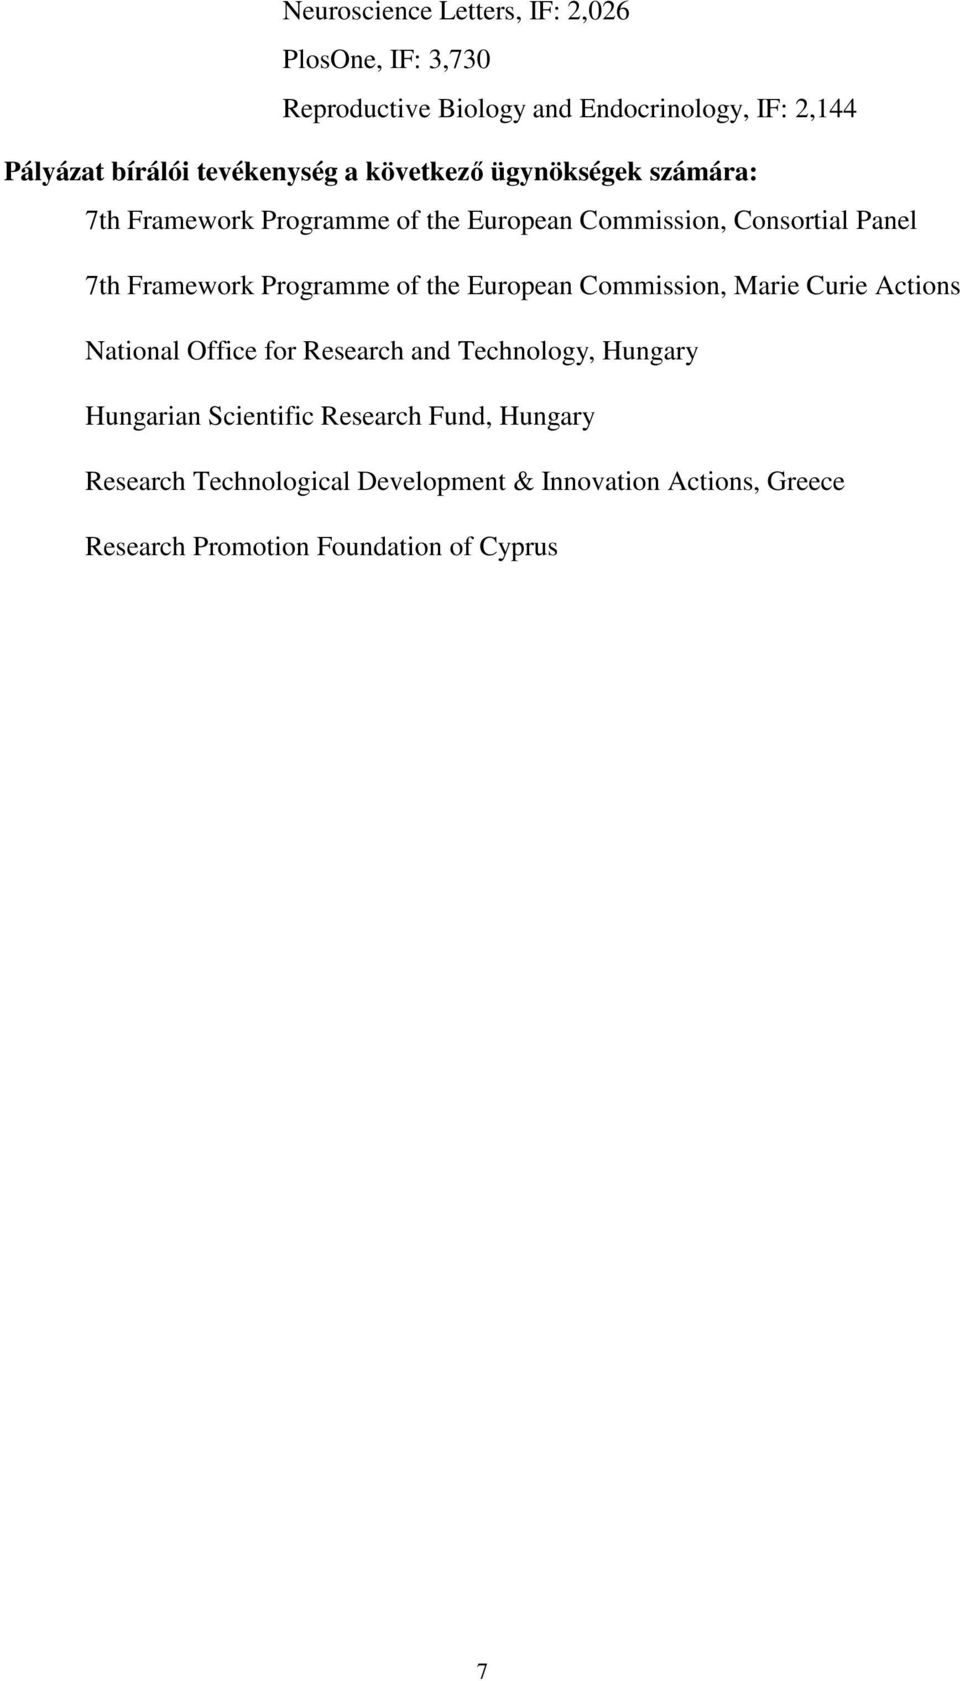 Framework Programme of the European Commission, Marie Curie Actions National Office for Research and Technology, Hungary